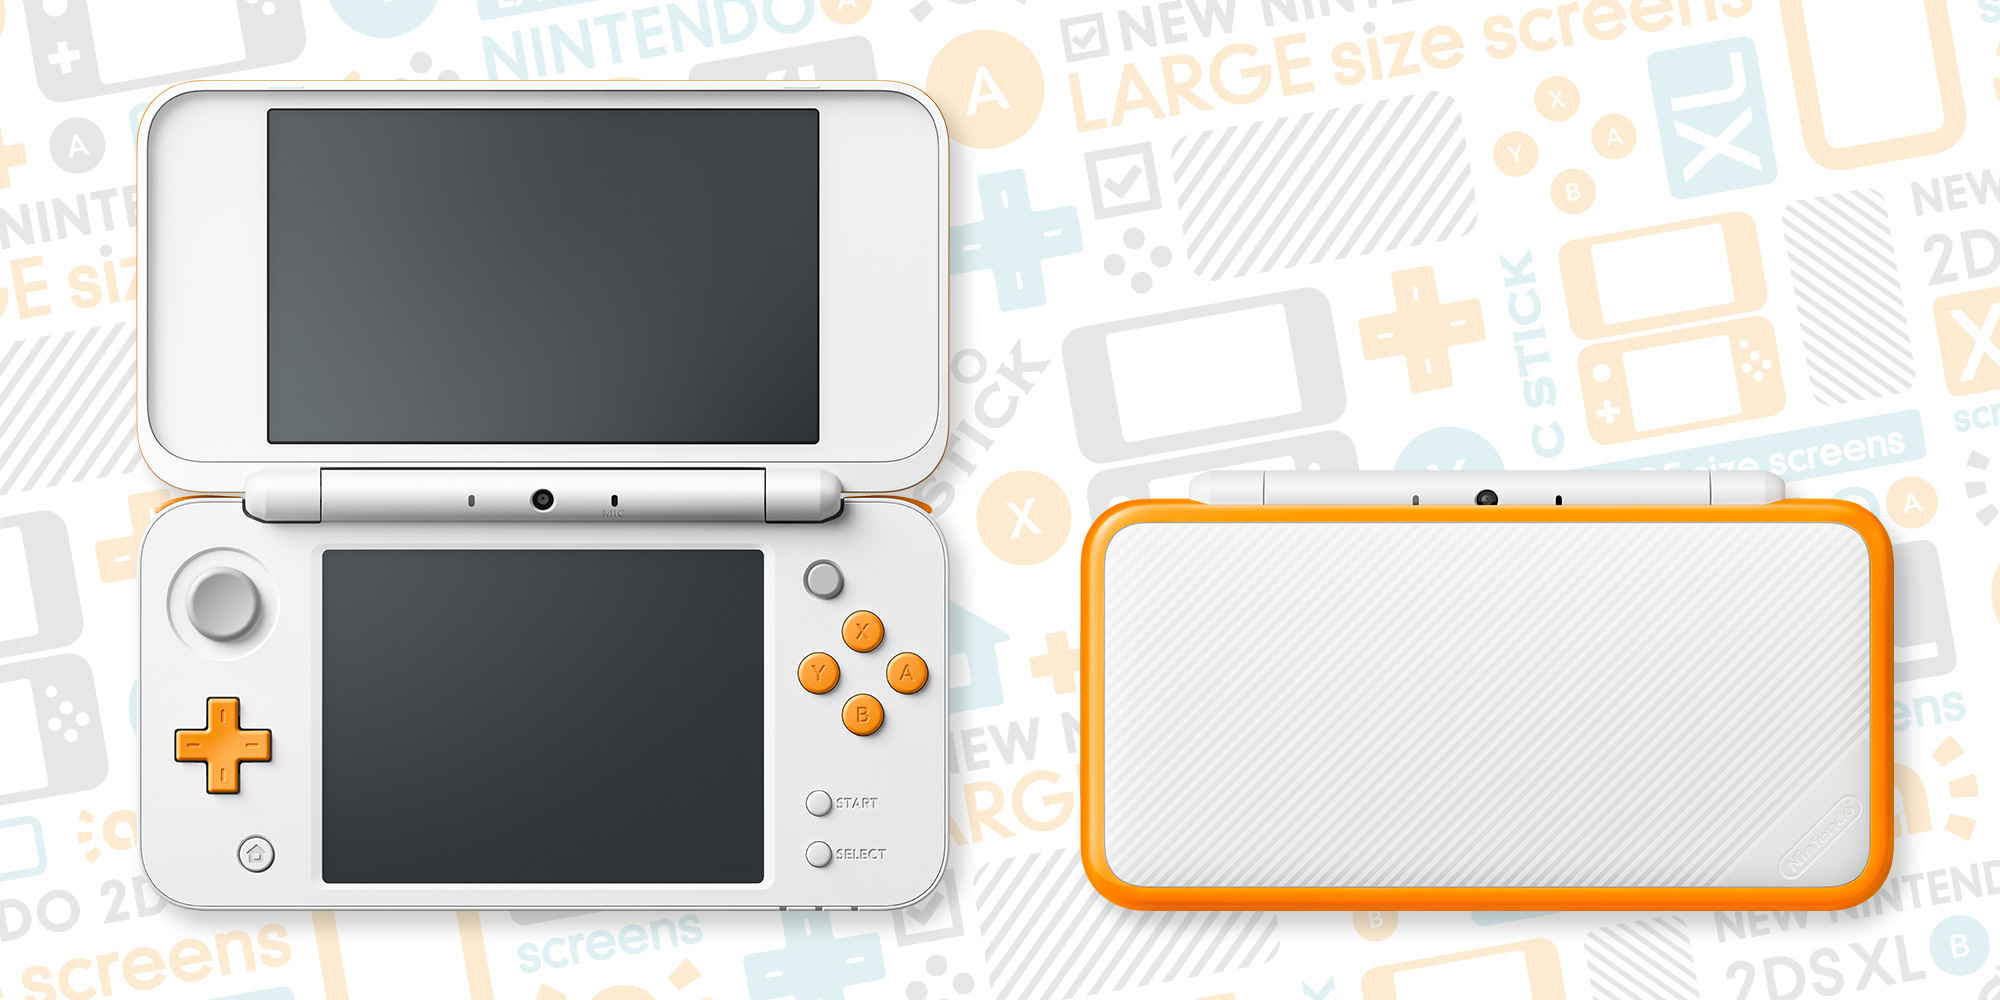 free 2ds games